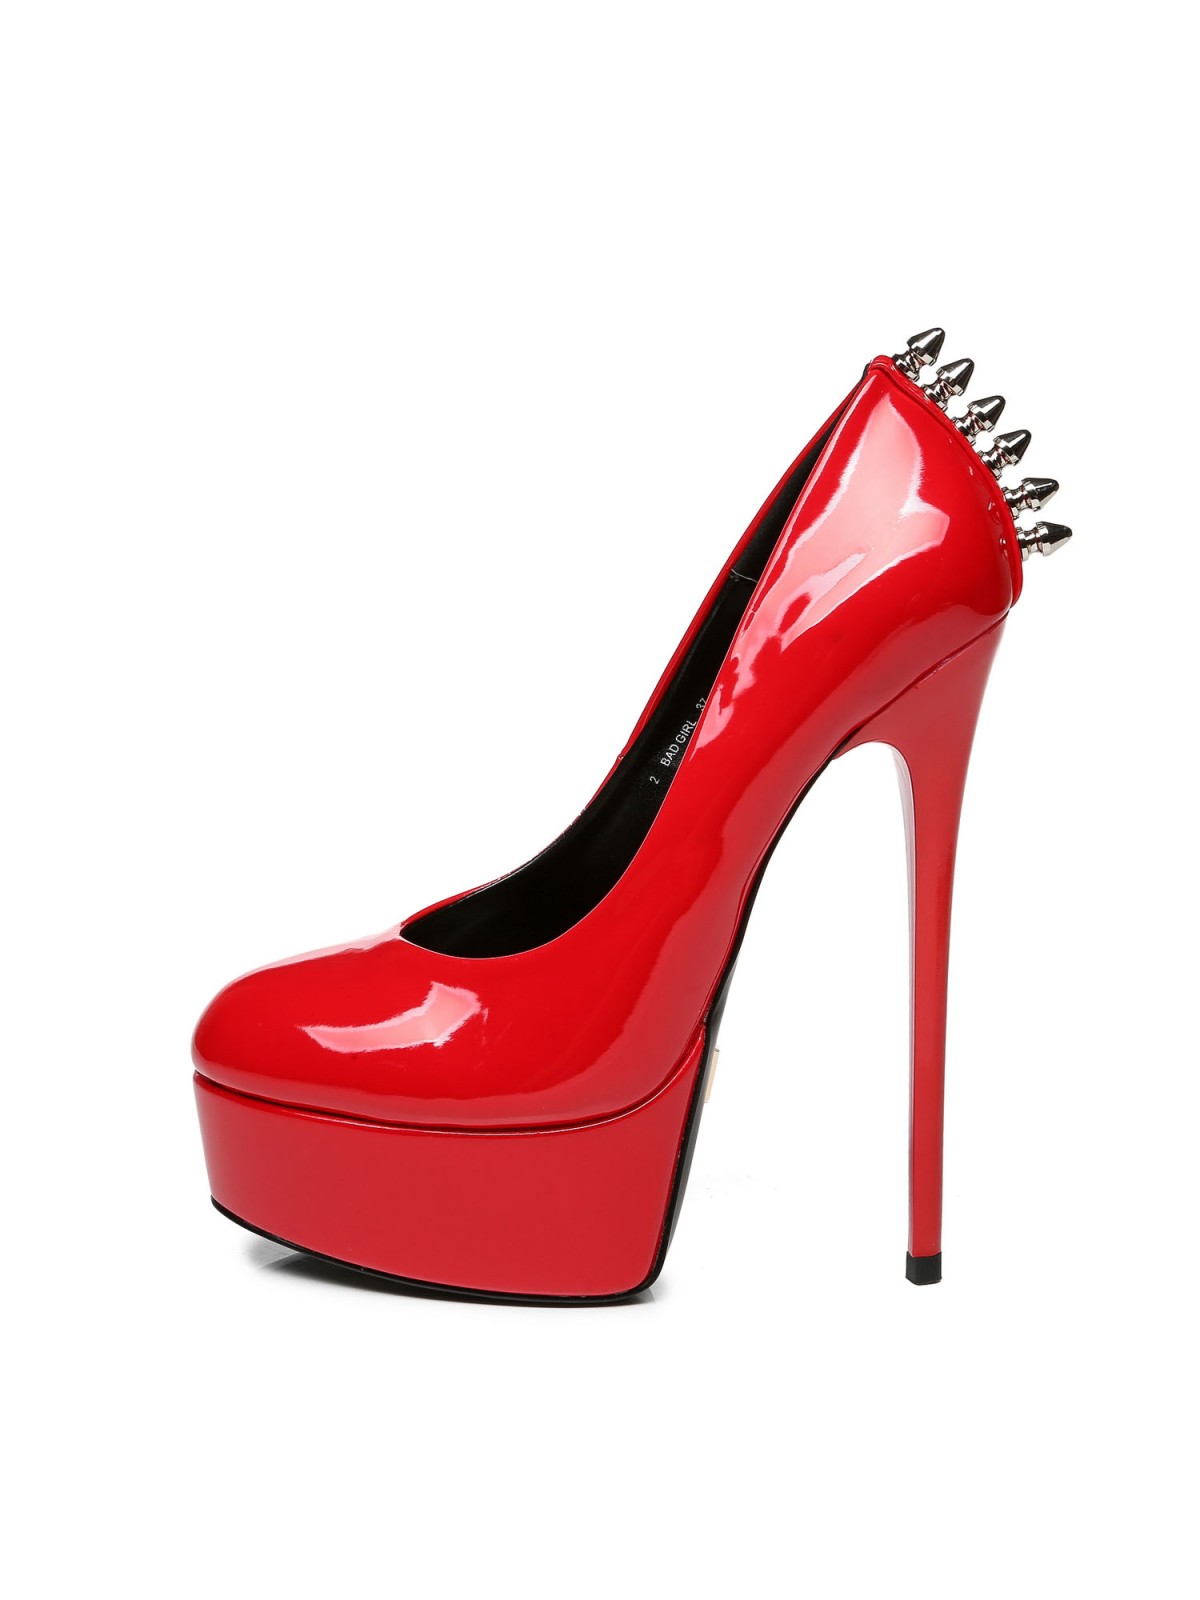 Giaro BAD GIRL red shiny pumps with rivets